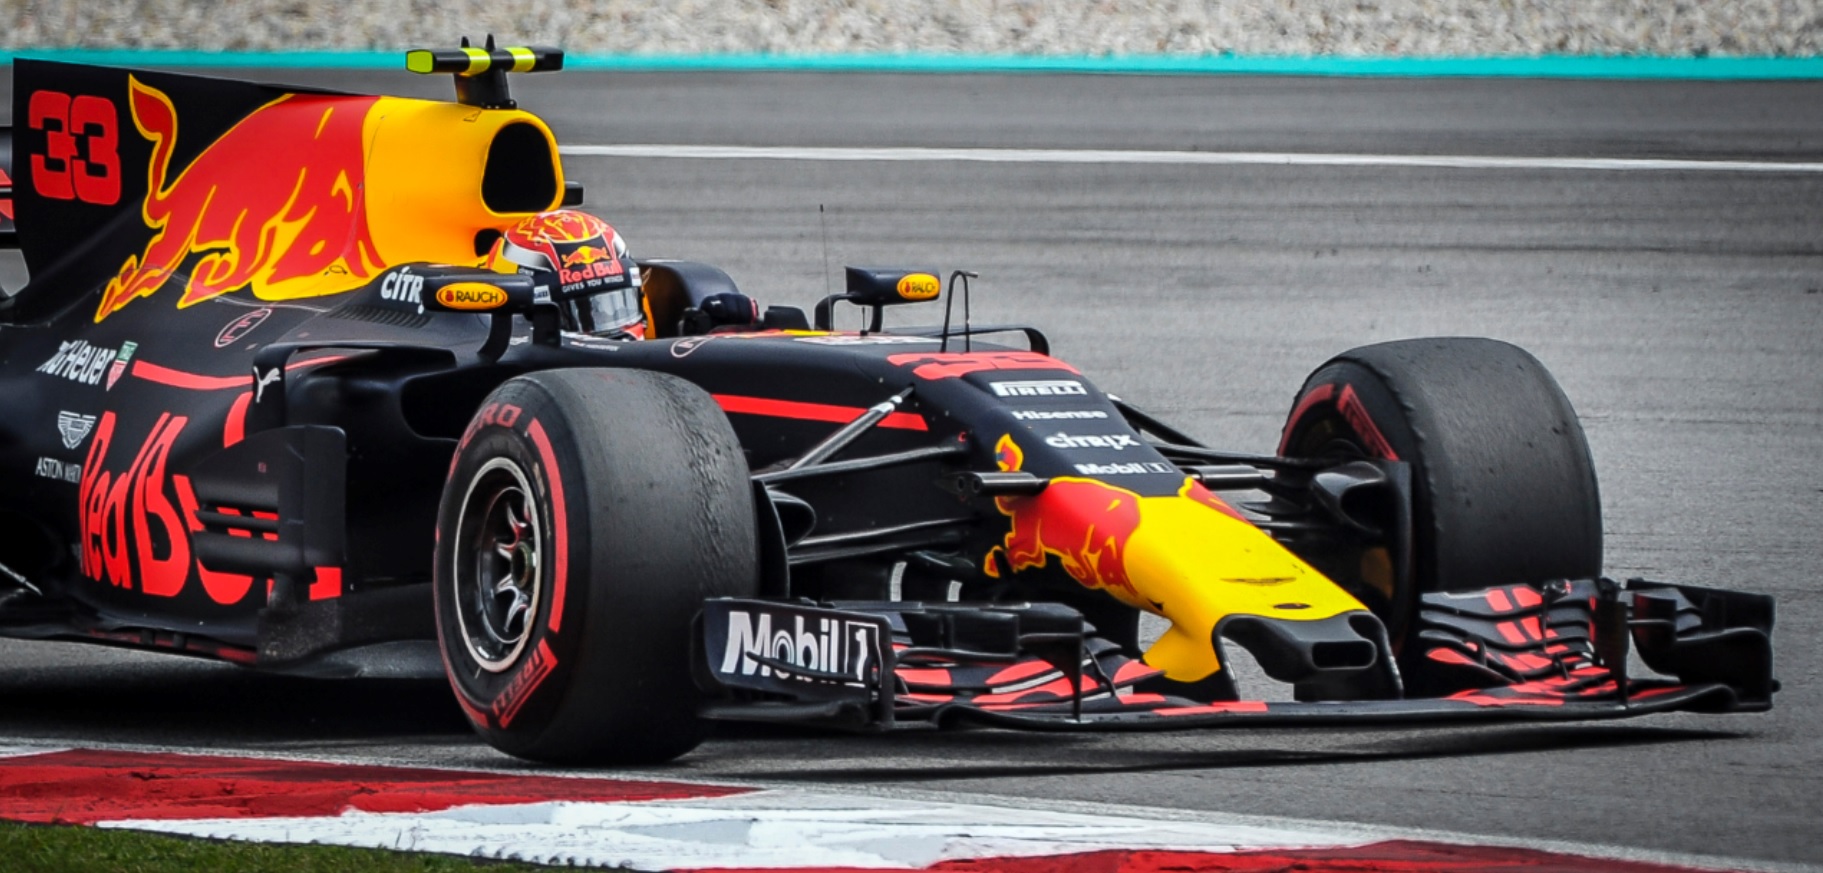 Red Bull Racing Team scores a $150M multi-year deal with Bybit exchange